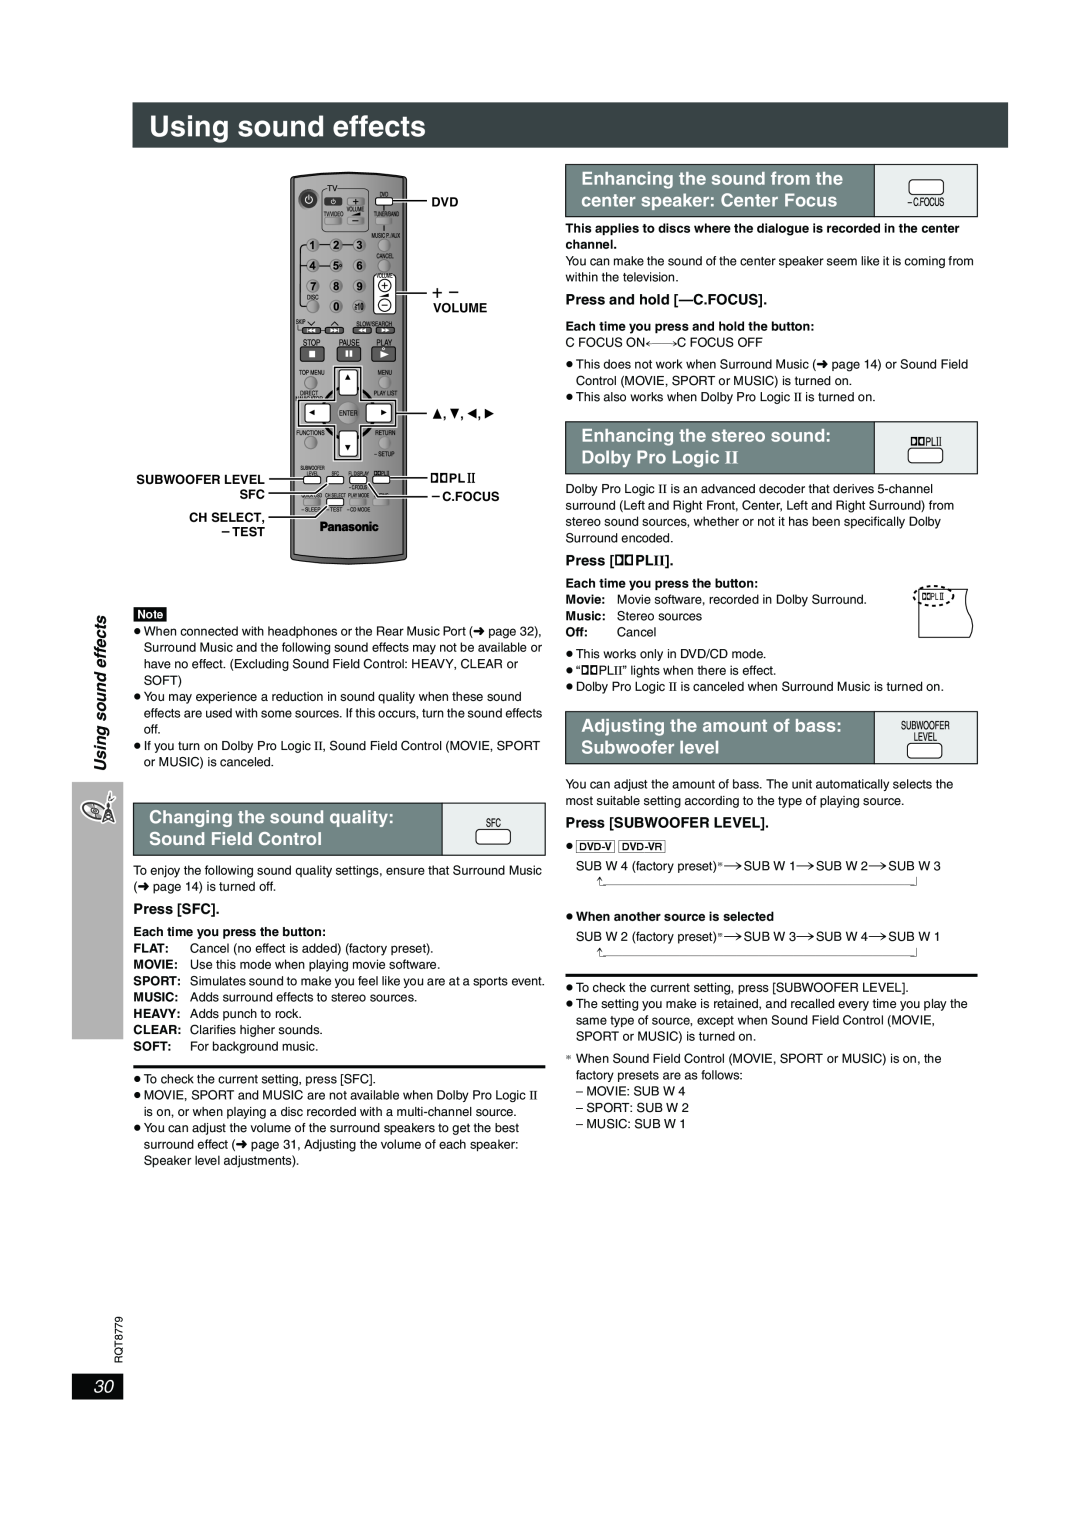 Panasonic SC-HT441W manual Using sound effects, Enhancing the sound from the, center speaker Center Focus, Dolby Pro Logic 